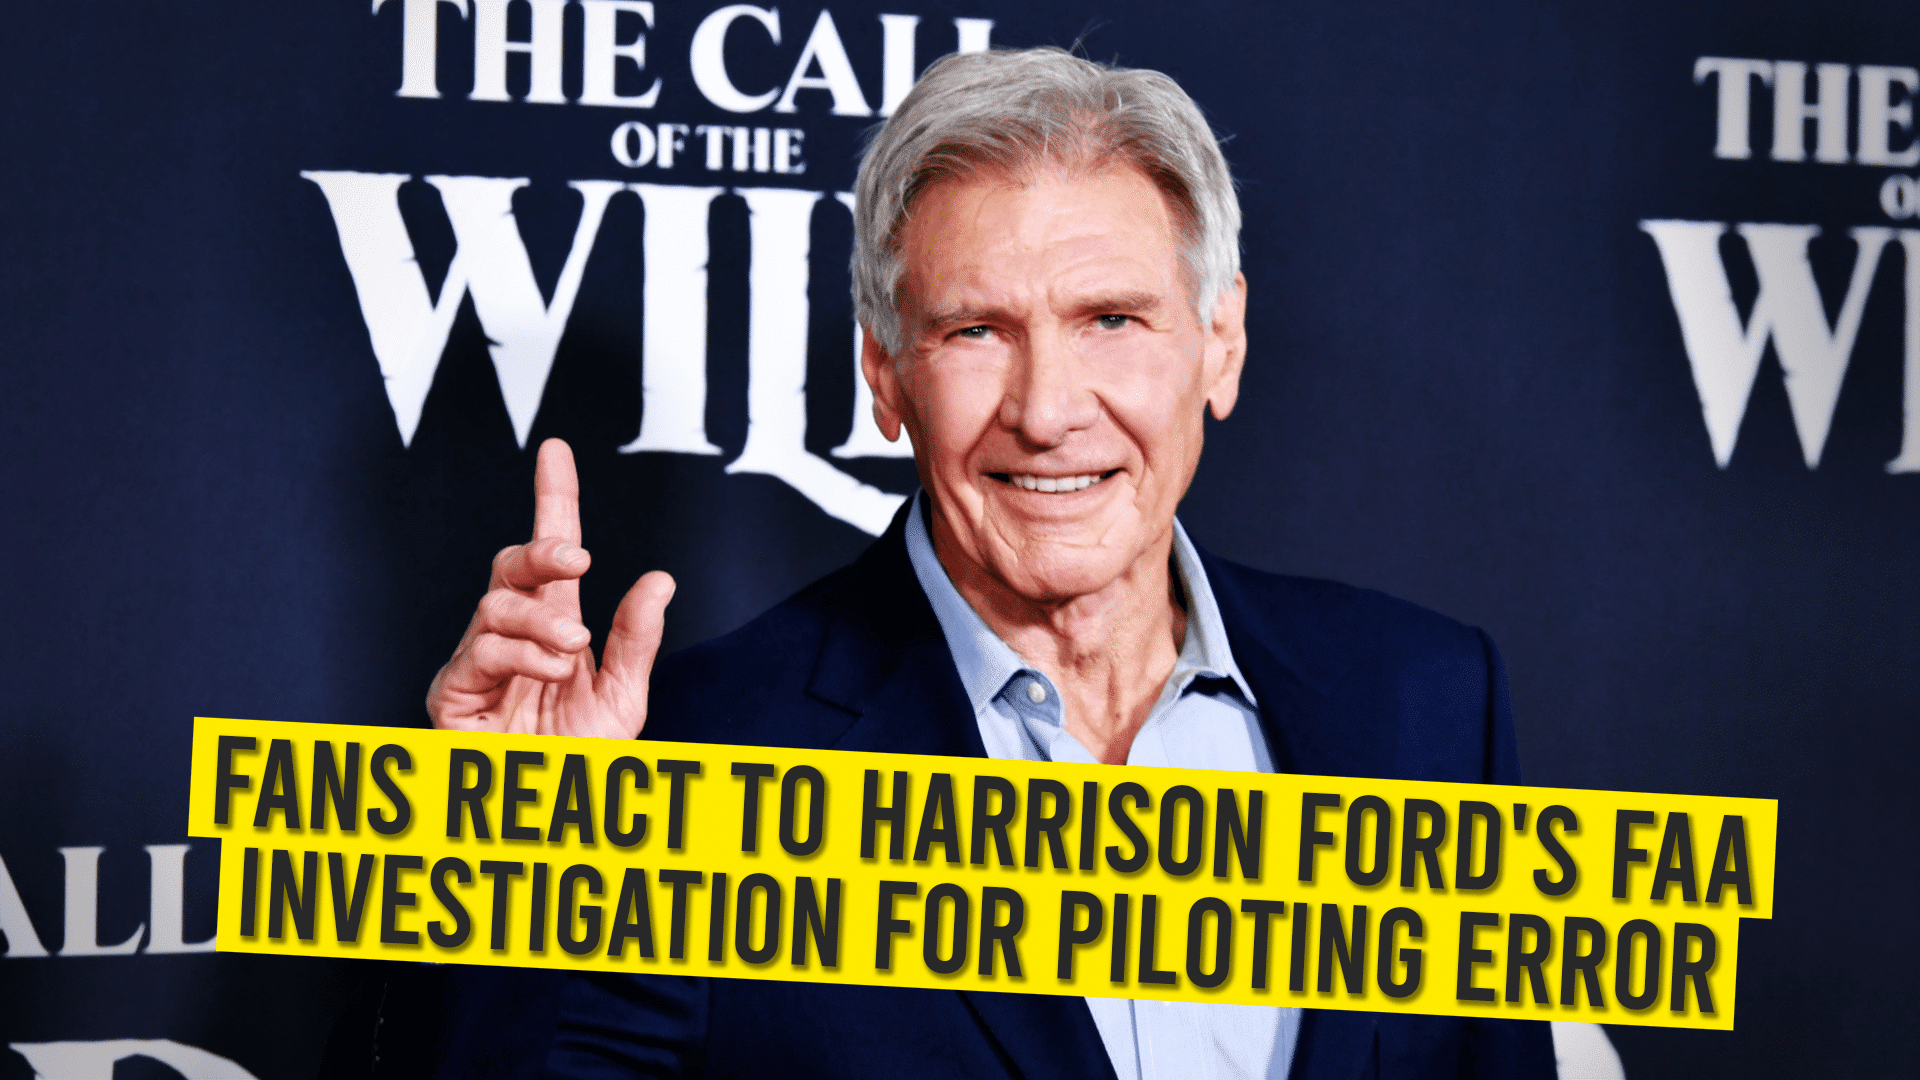 Fans React to Harrison Ford’s FAA Investigation for Piloting Error